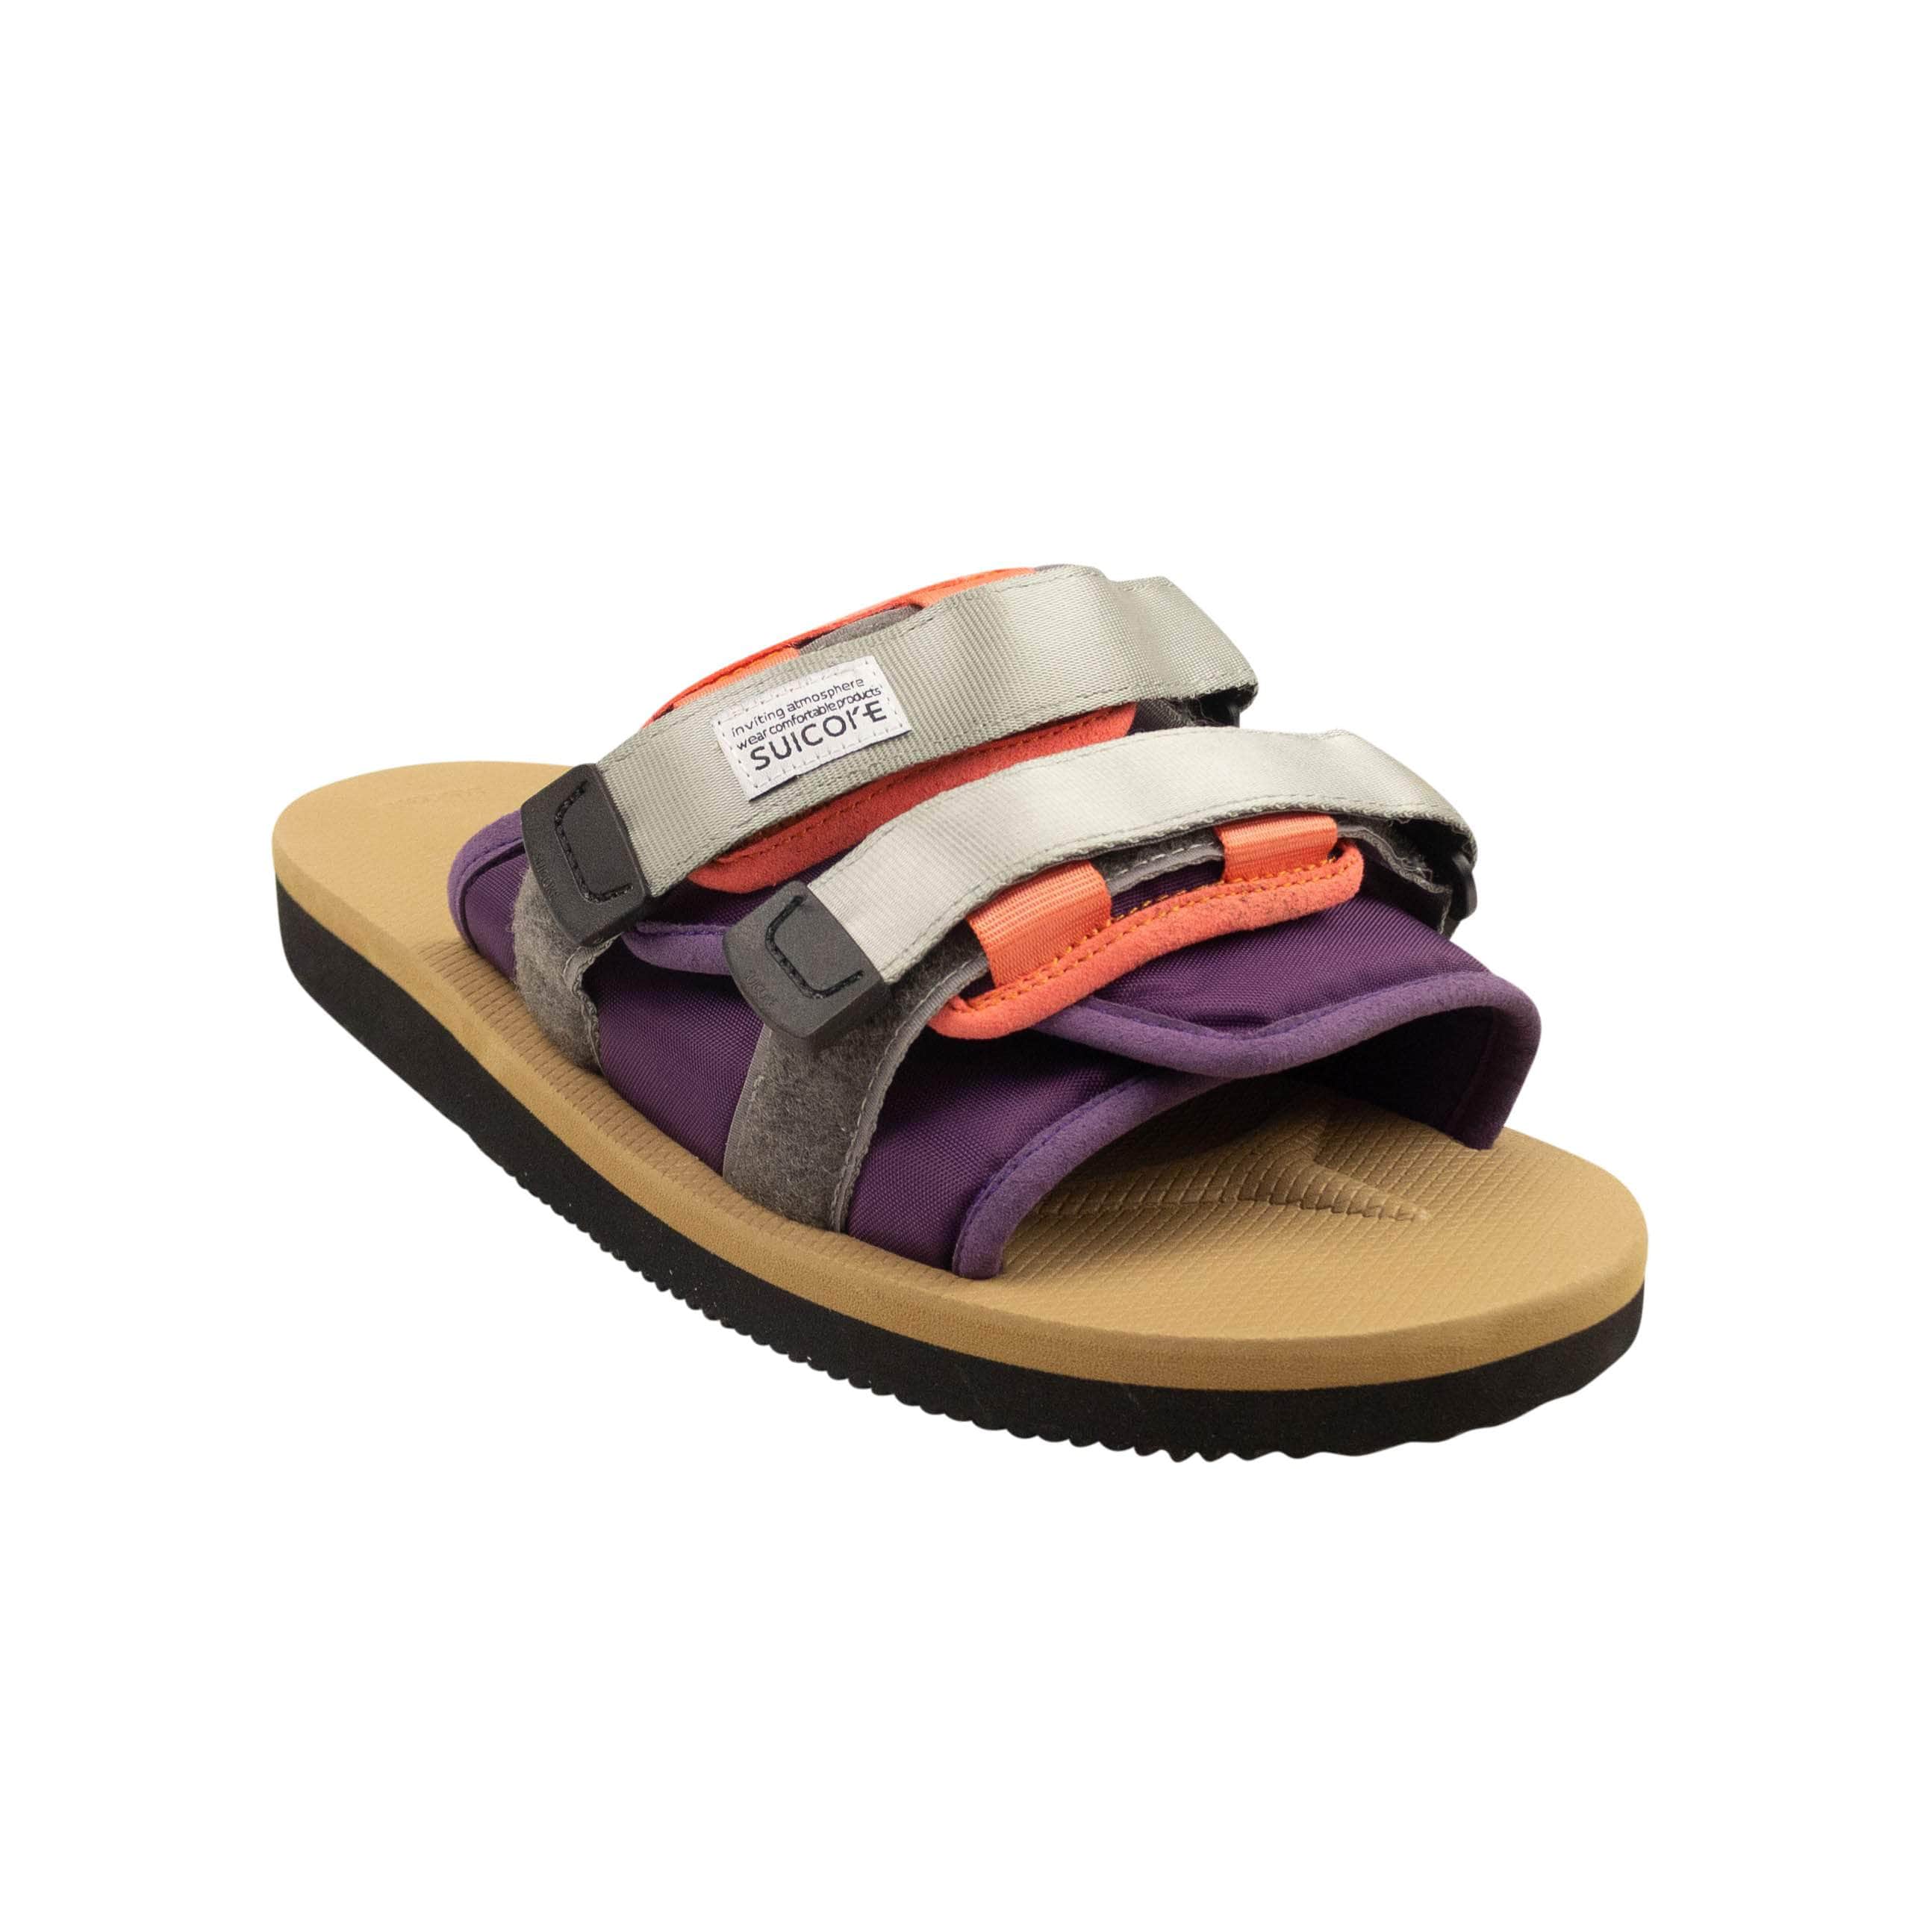 Suicoke channelenable-all, chicmi, couponcollection, gender-mens, main-shoes, mens-shoes, mens-slides-slippers, size-11, size-12, size-4, size-5, size-6, size-7, size-9, suicoke, under-250 Purple And Beige Moto Cab Slides